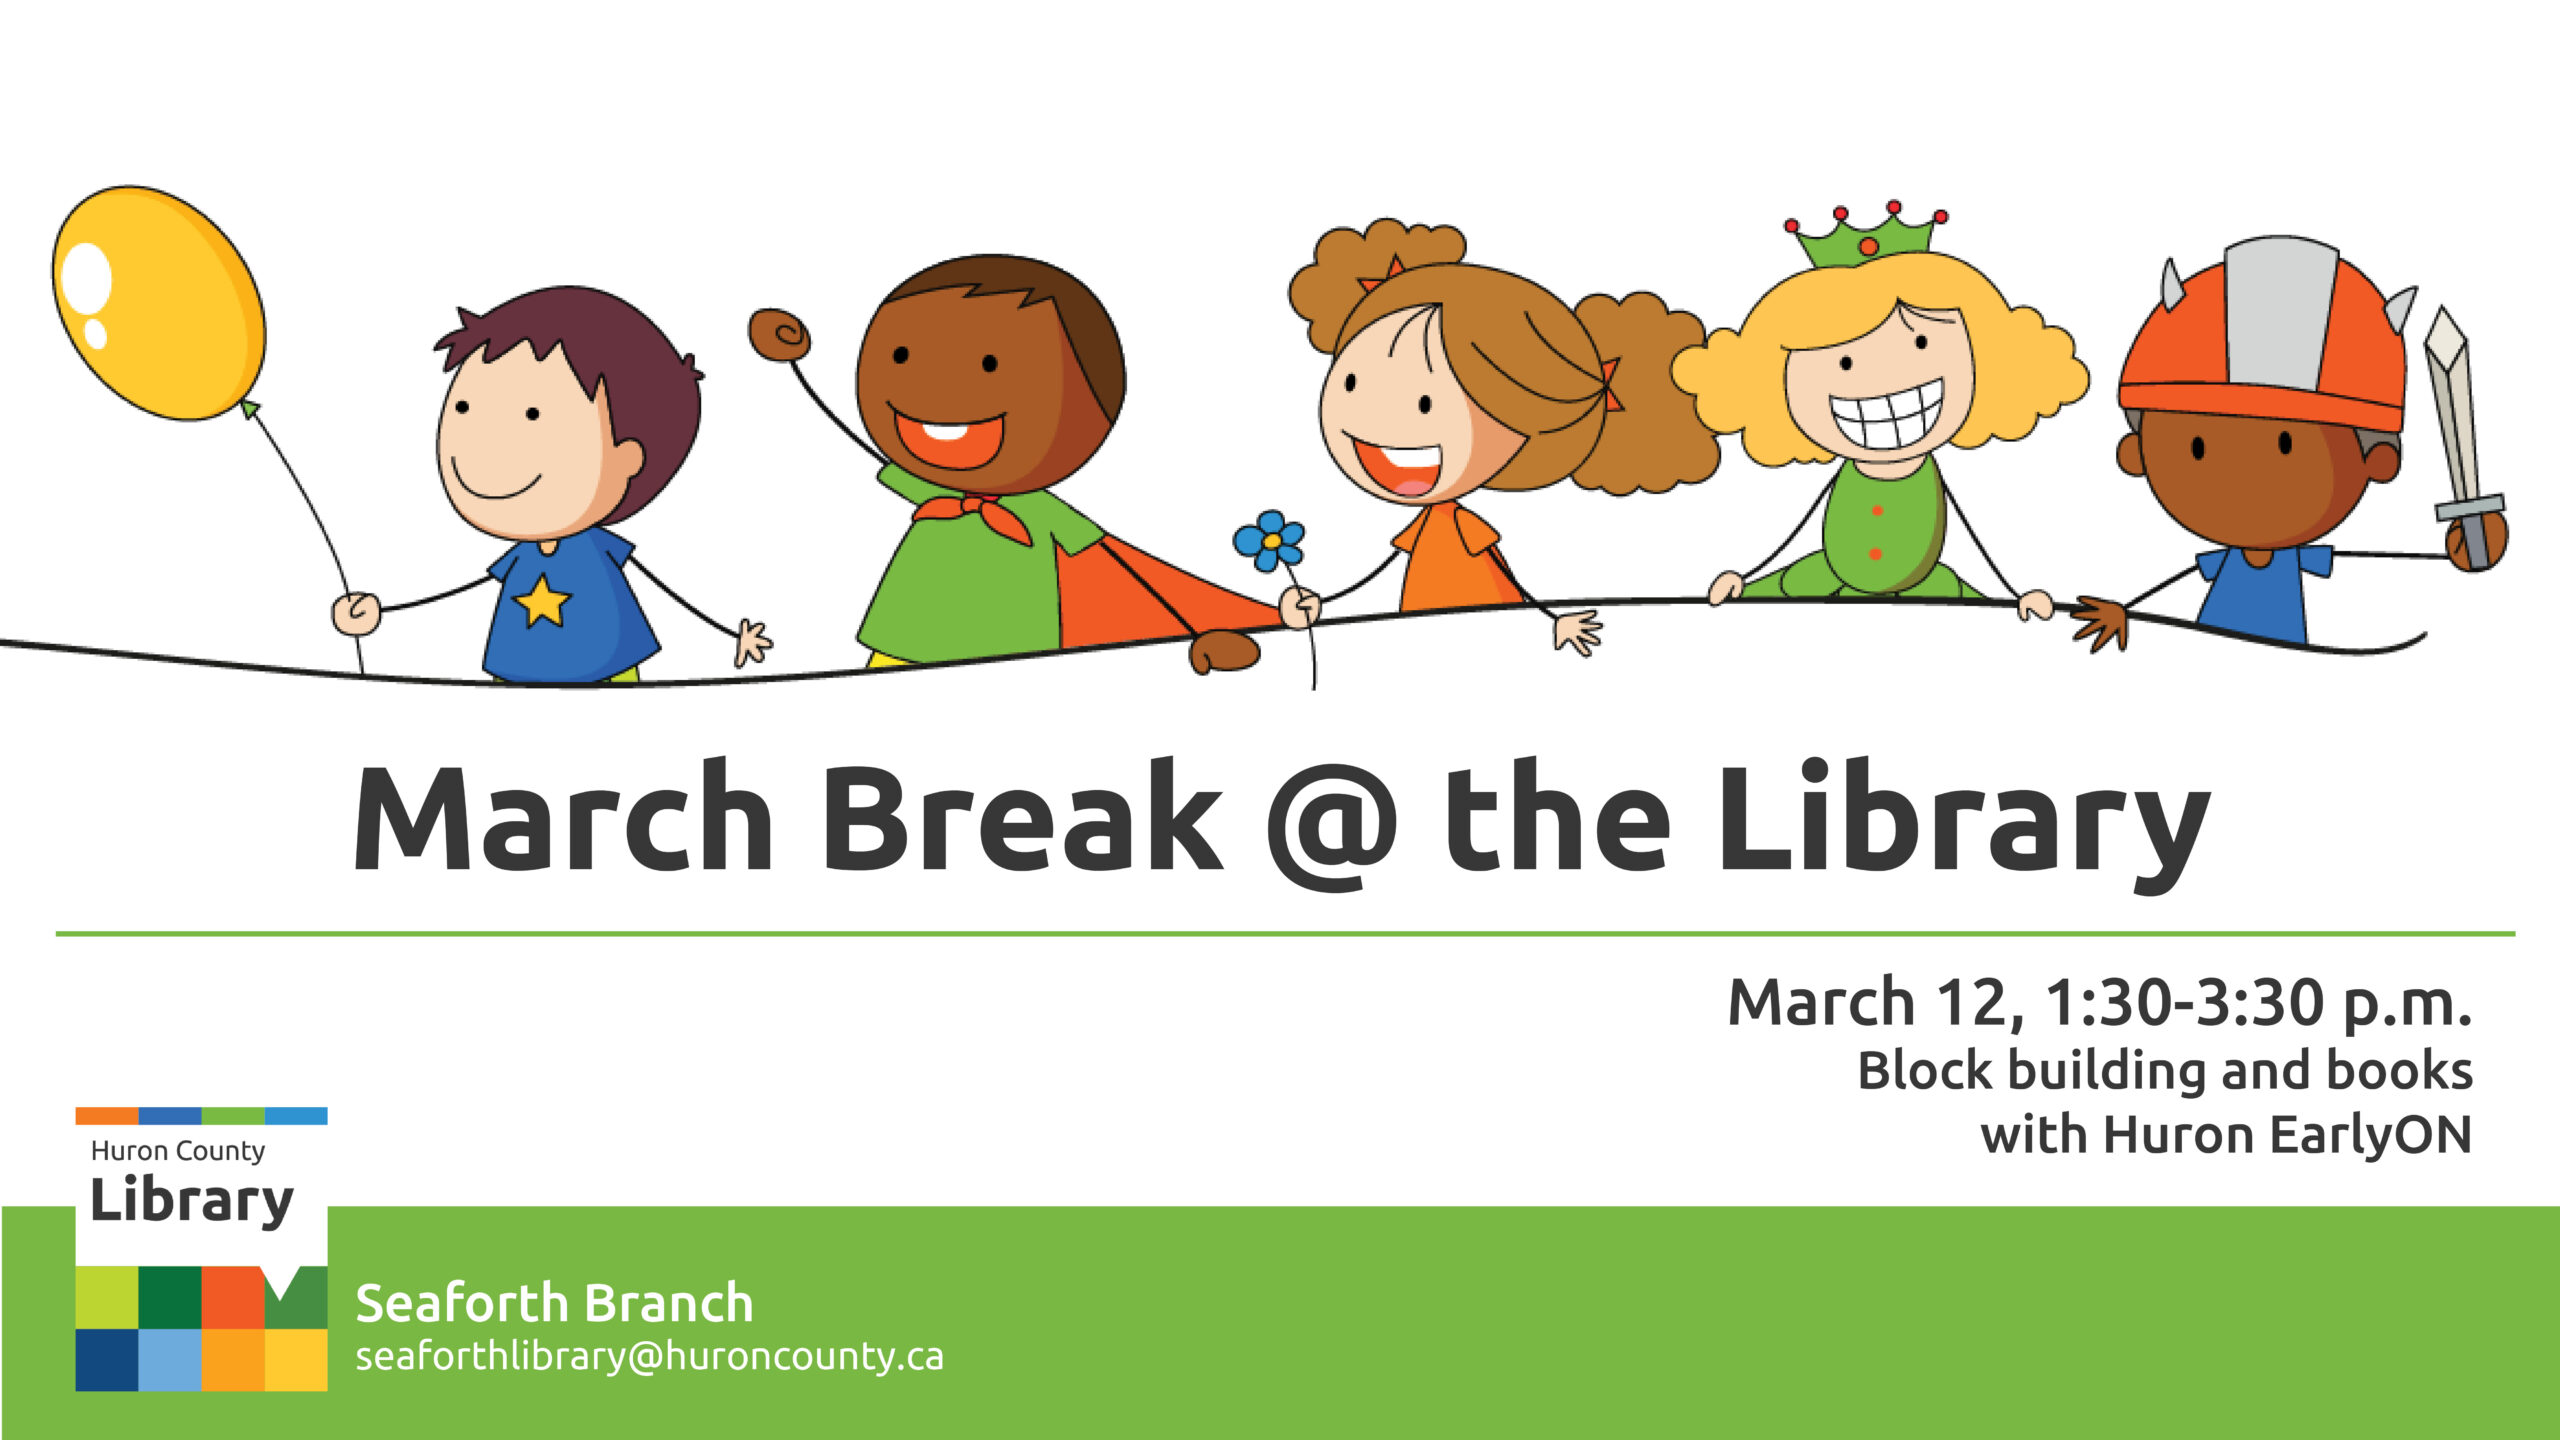 Illustration of kids having fun with text promoting March Break at the library